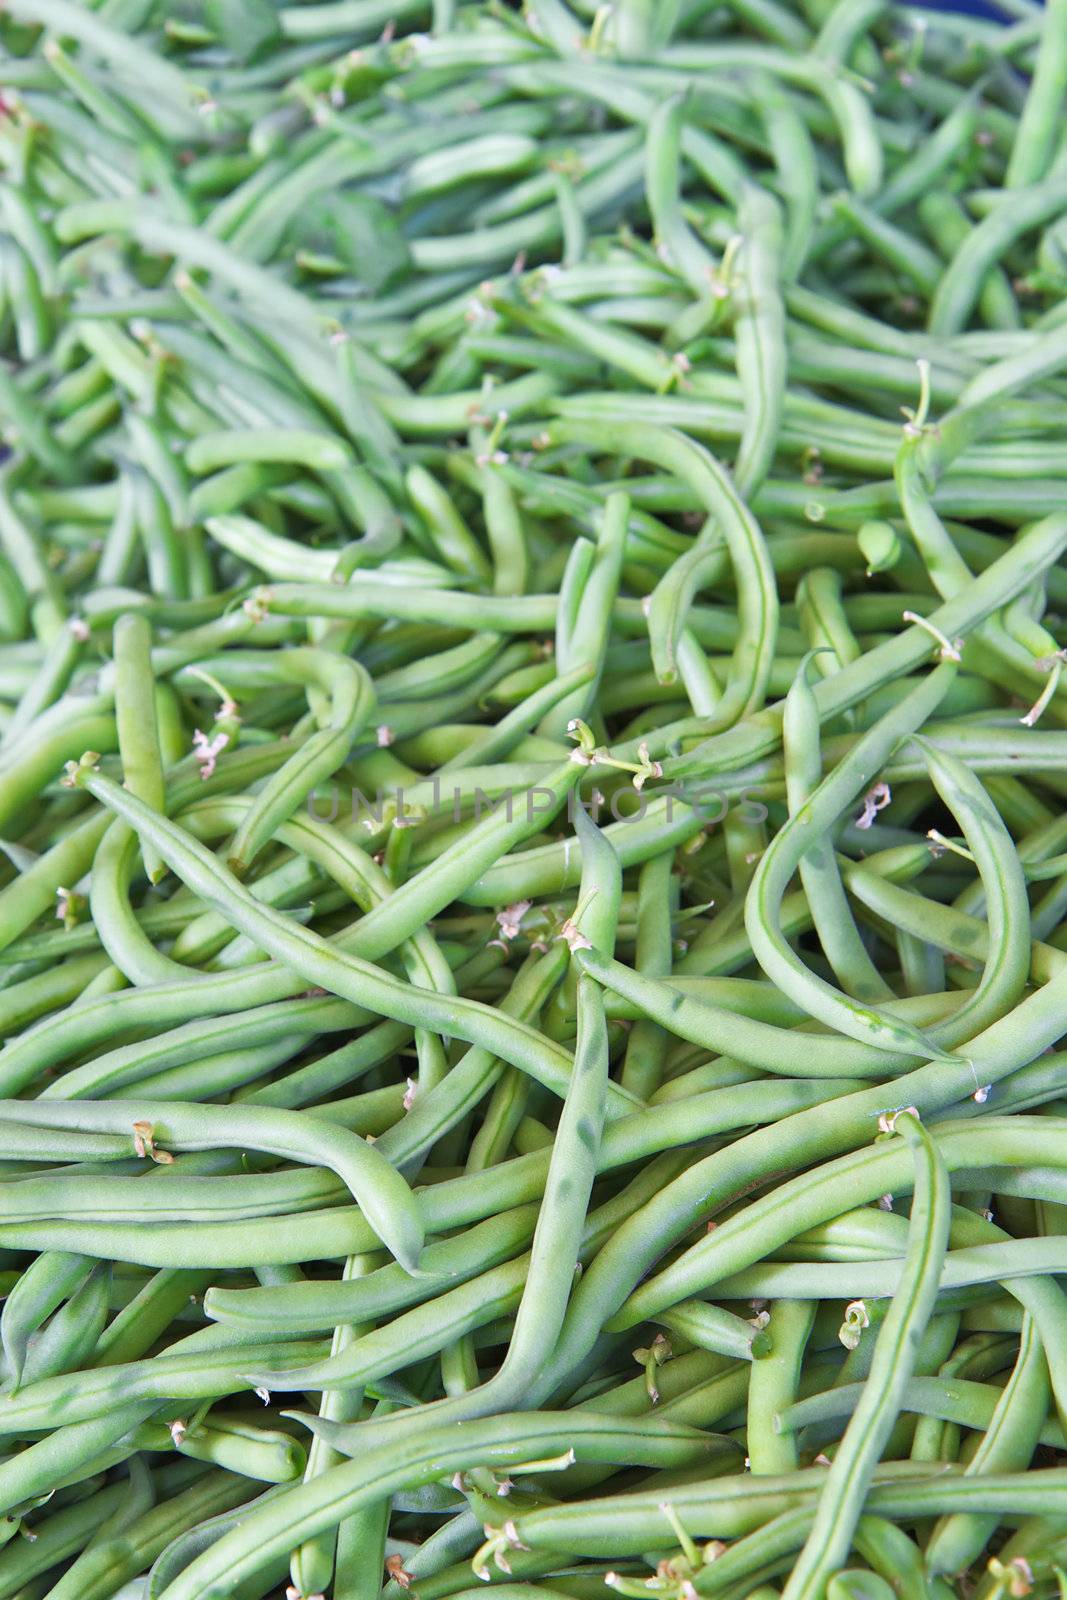 Large pile of green beanns at farmers market